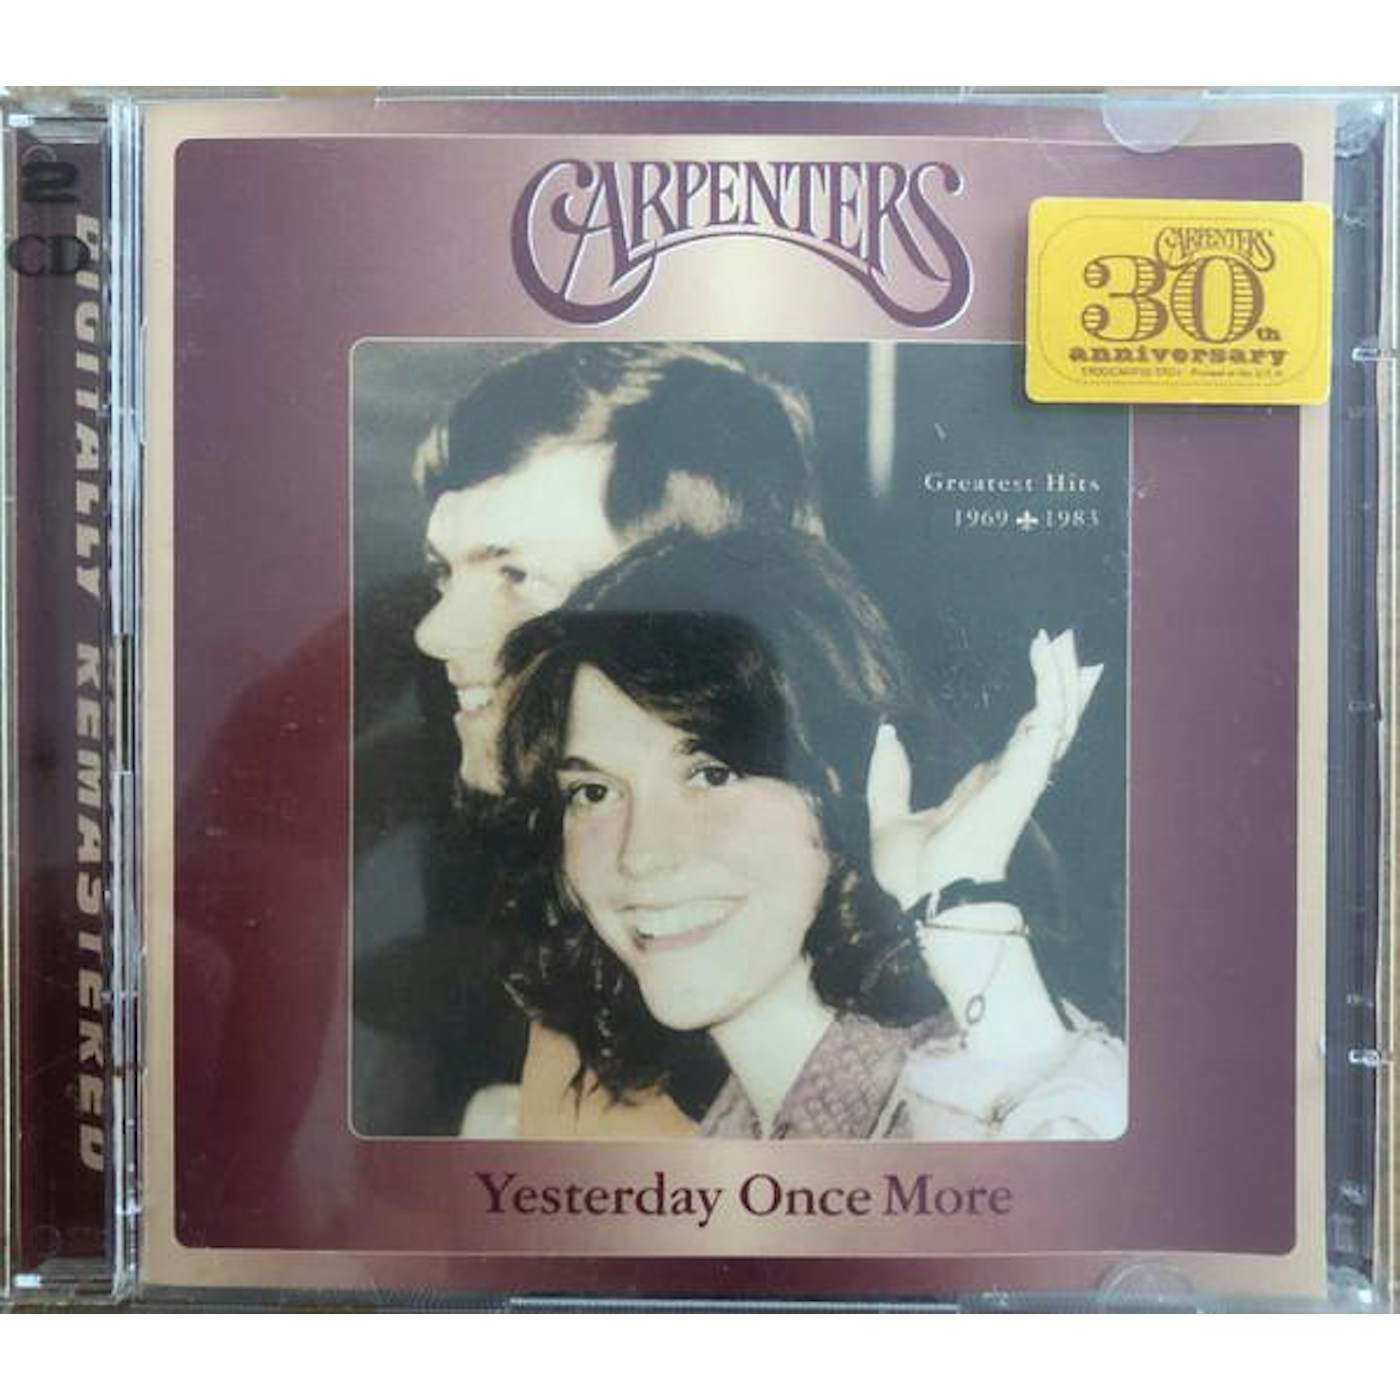 Carpenters YESTERDAY ONCE MORE: GREATEST HITS 1969 - 1983 CD